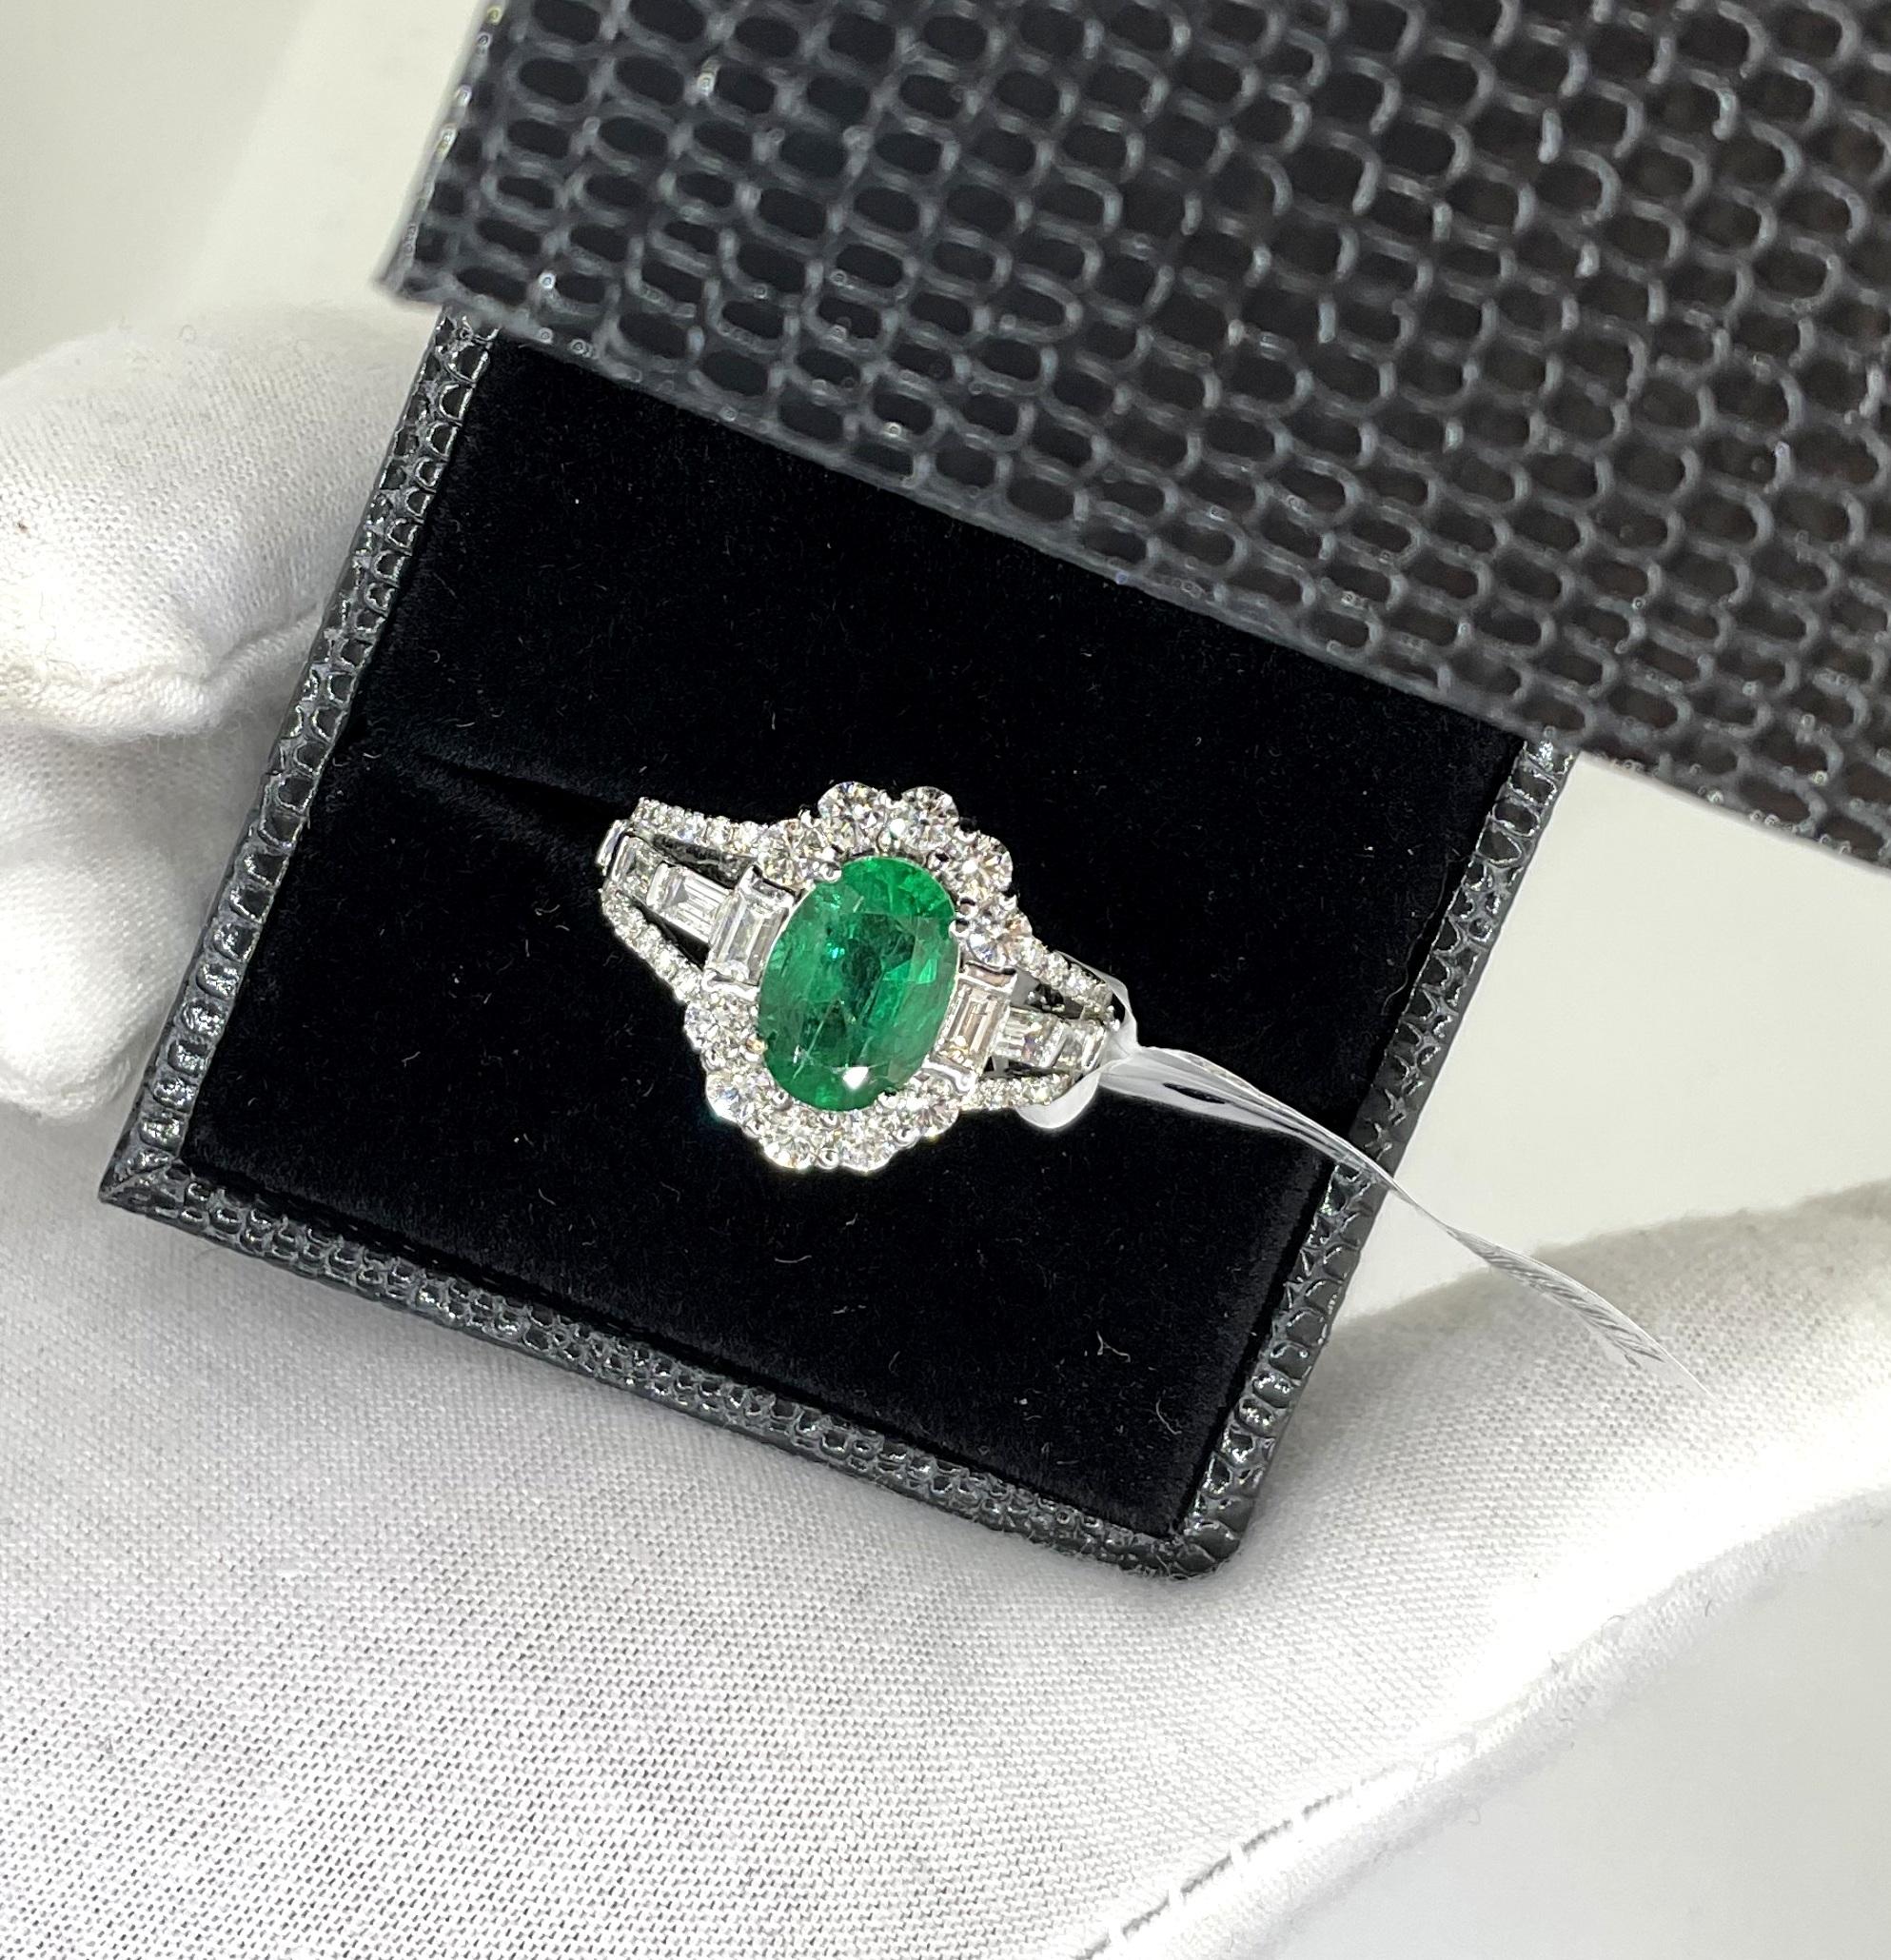 18k Gold Art Deco Zambian Emerald Cocktail Ring 2.05 cts with 1.49 ct Diamonds  For Sale 9